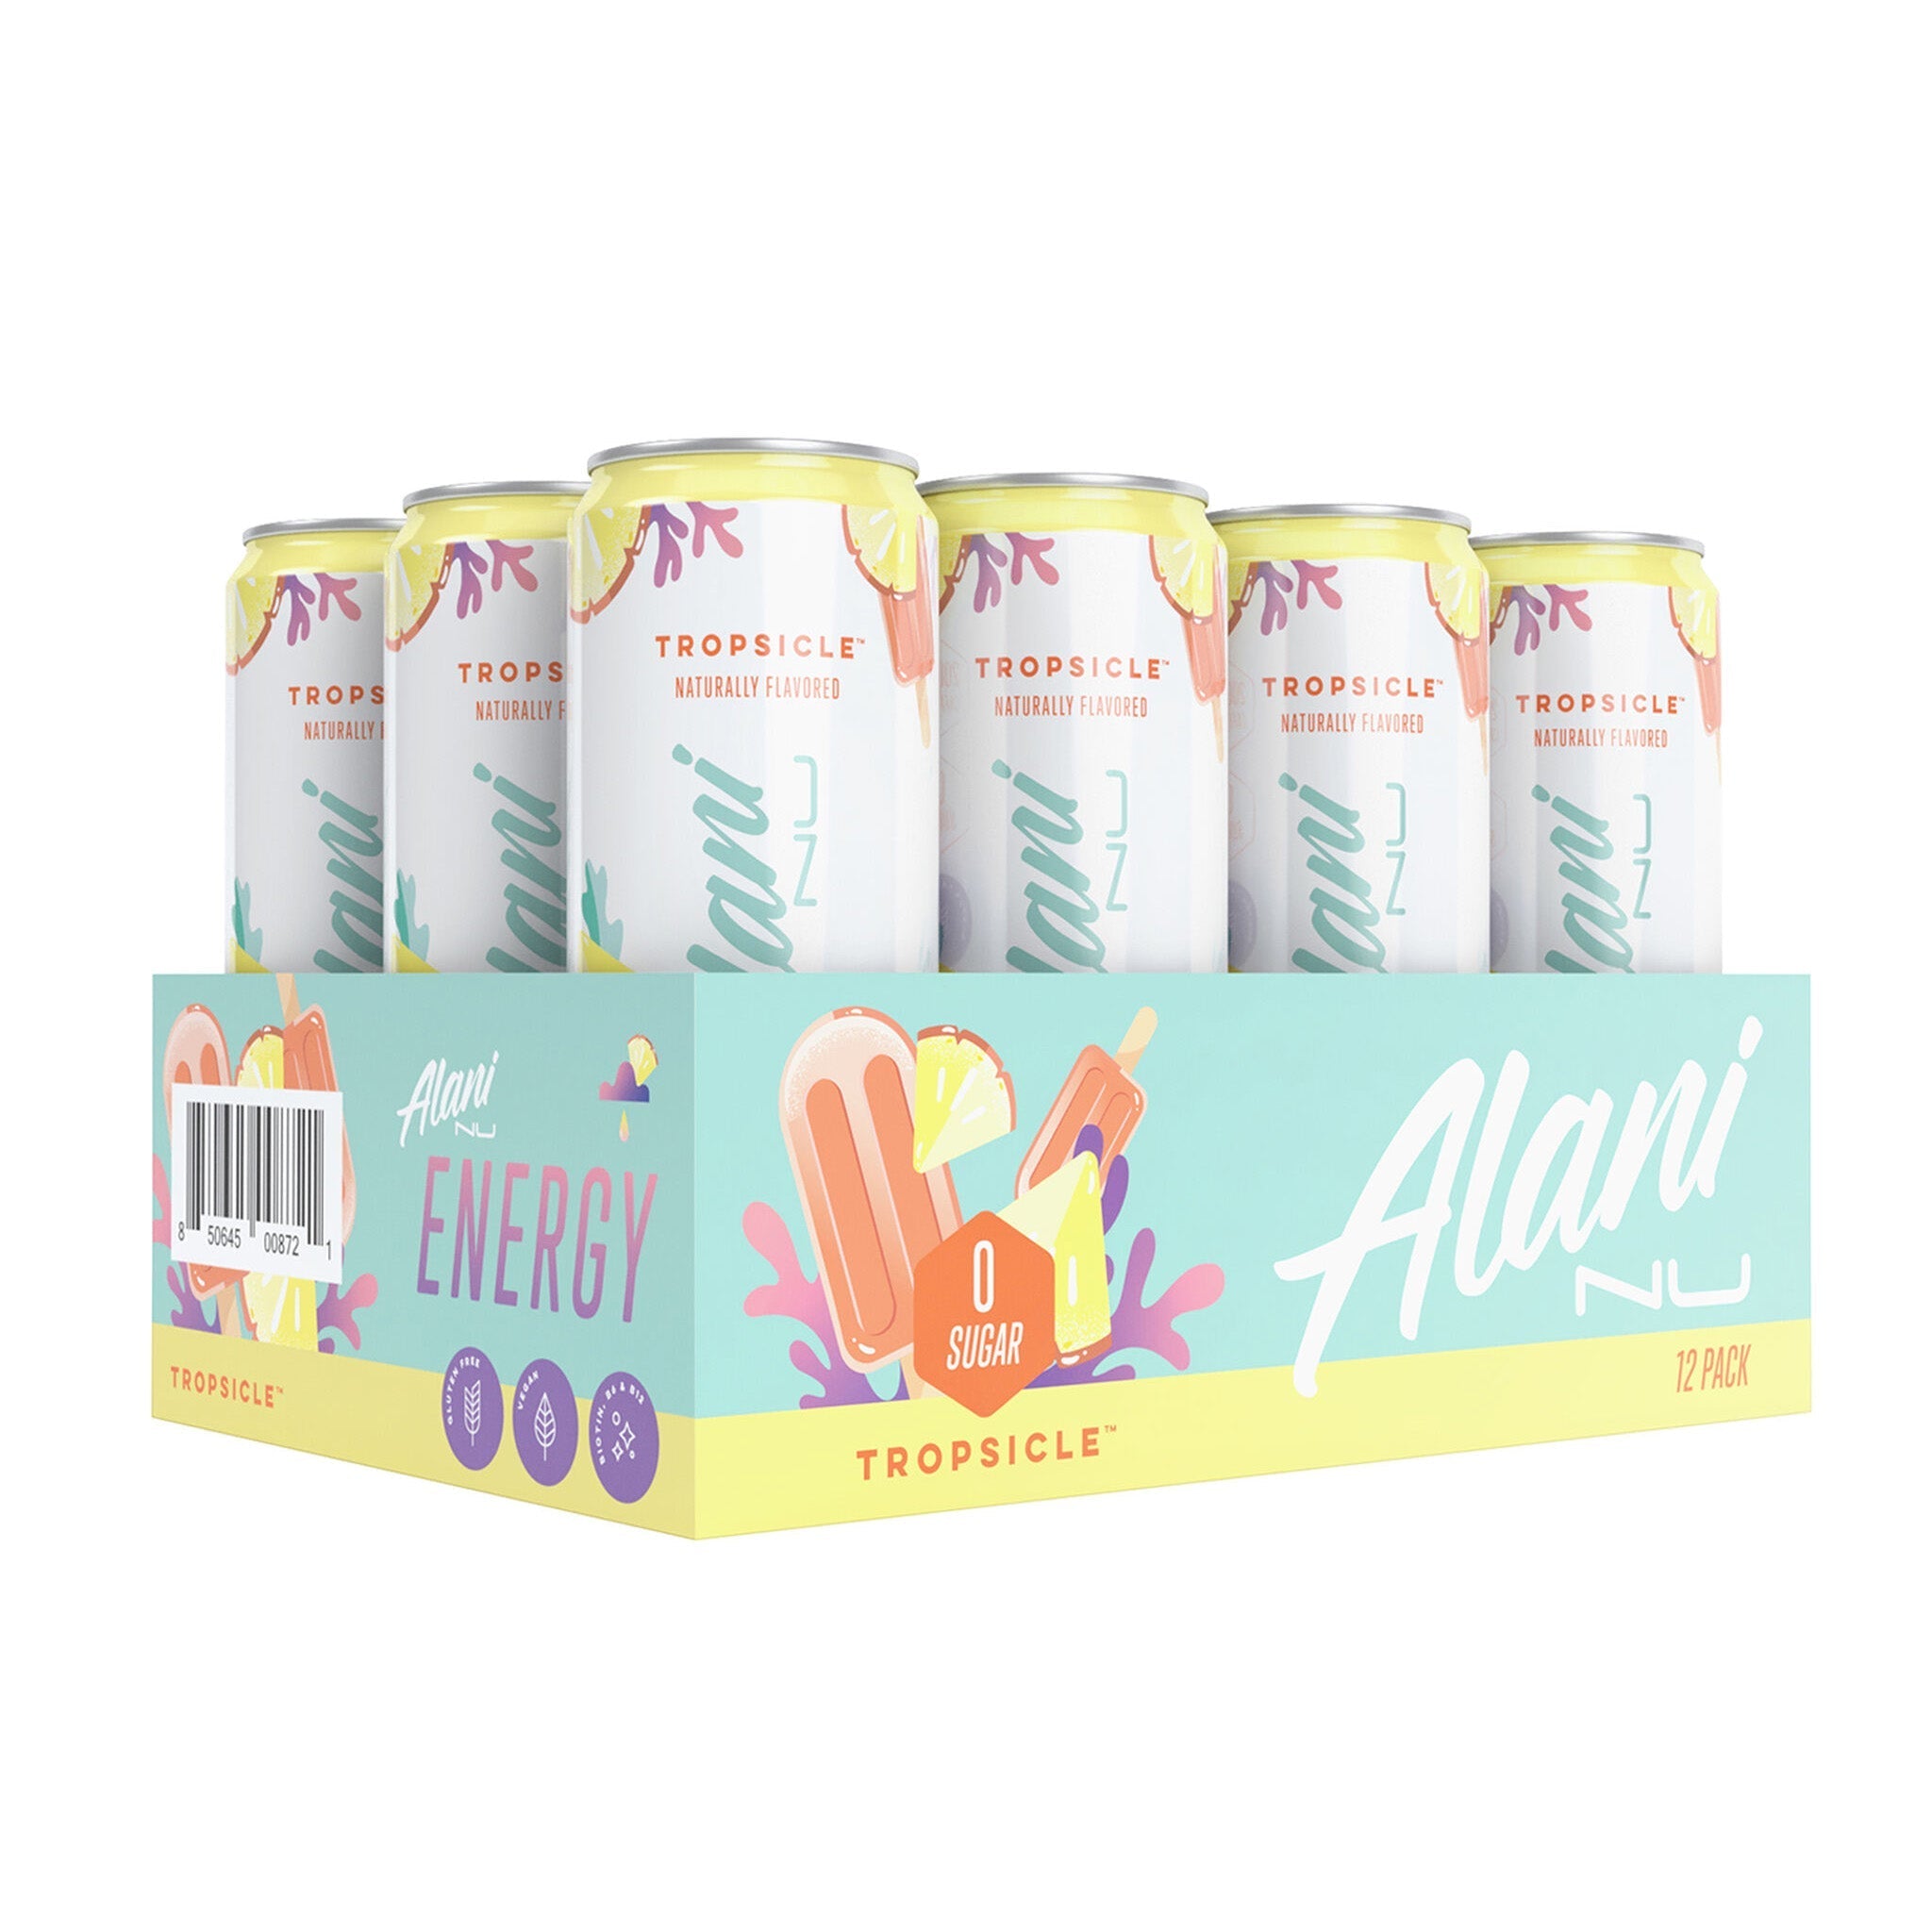 Alani Nu Energy Drink (12 Can) - EXP 11/23